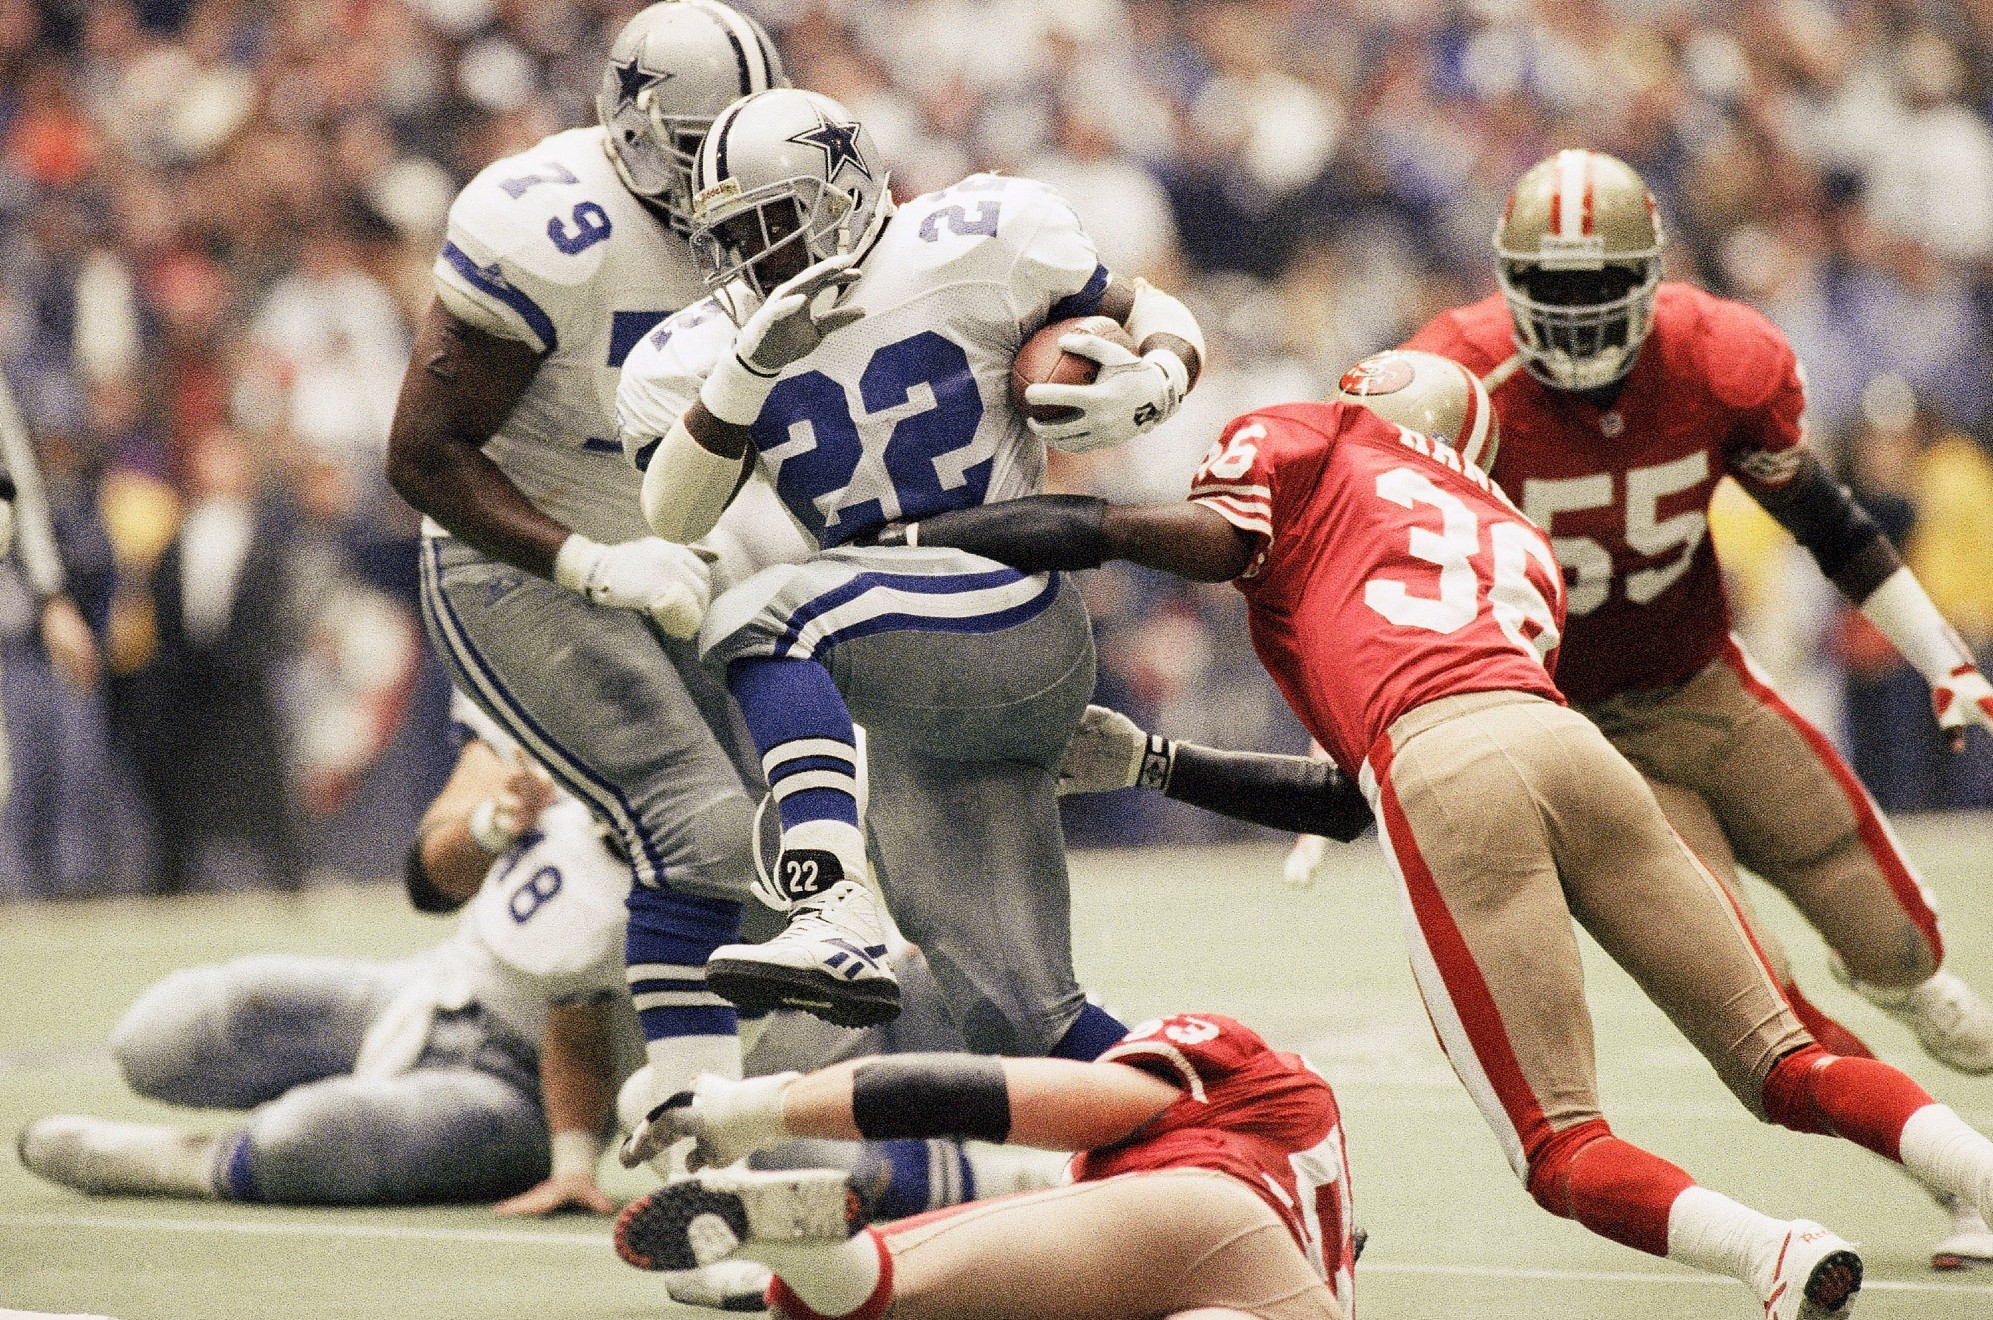 Cowboys-49ers historic rivalry makes sunday game tickets the most expensive  of the Divisional round